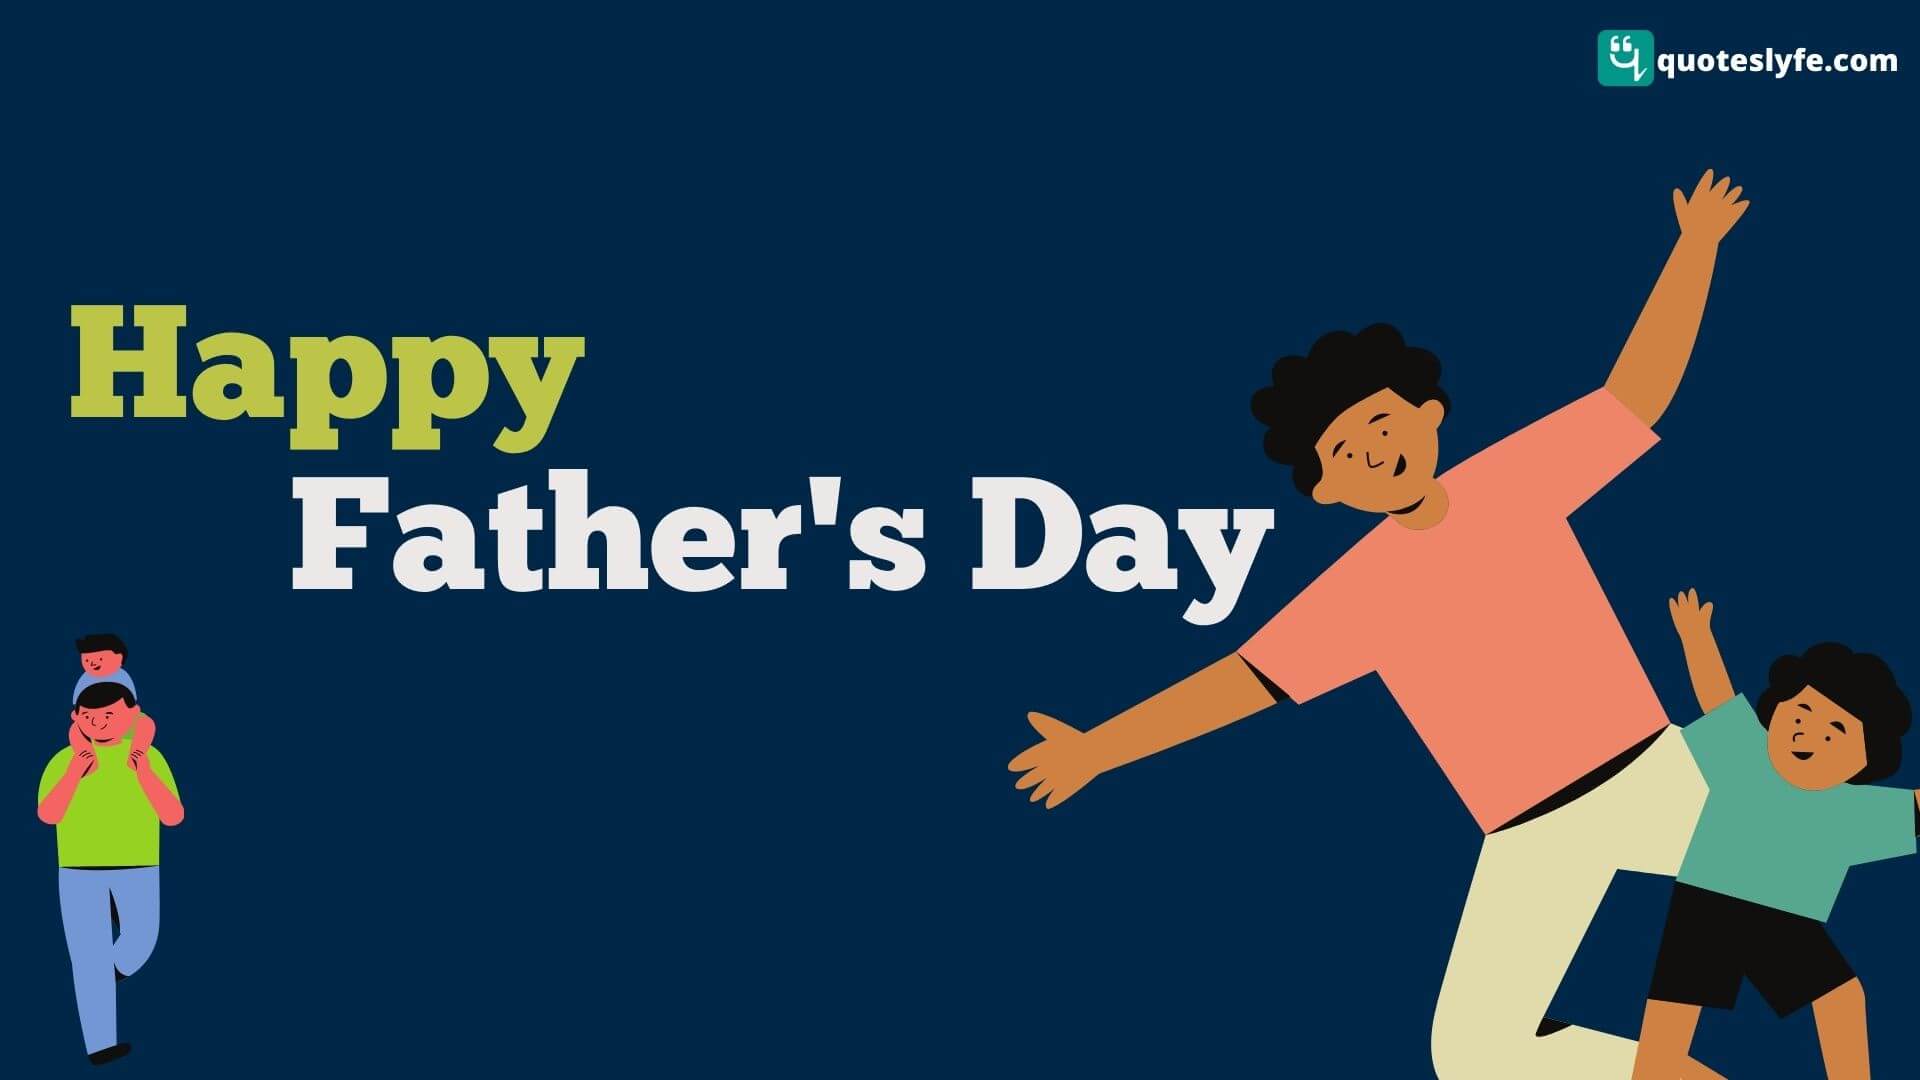 Best Father's Day: Quotes, Messages, Images, Wishes, Cards, Greetings, Wallpapers, GIFs, PNG, and Pictures